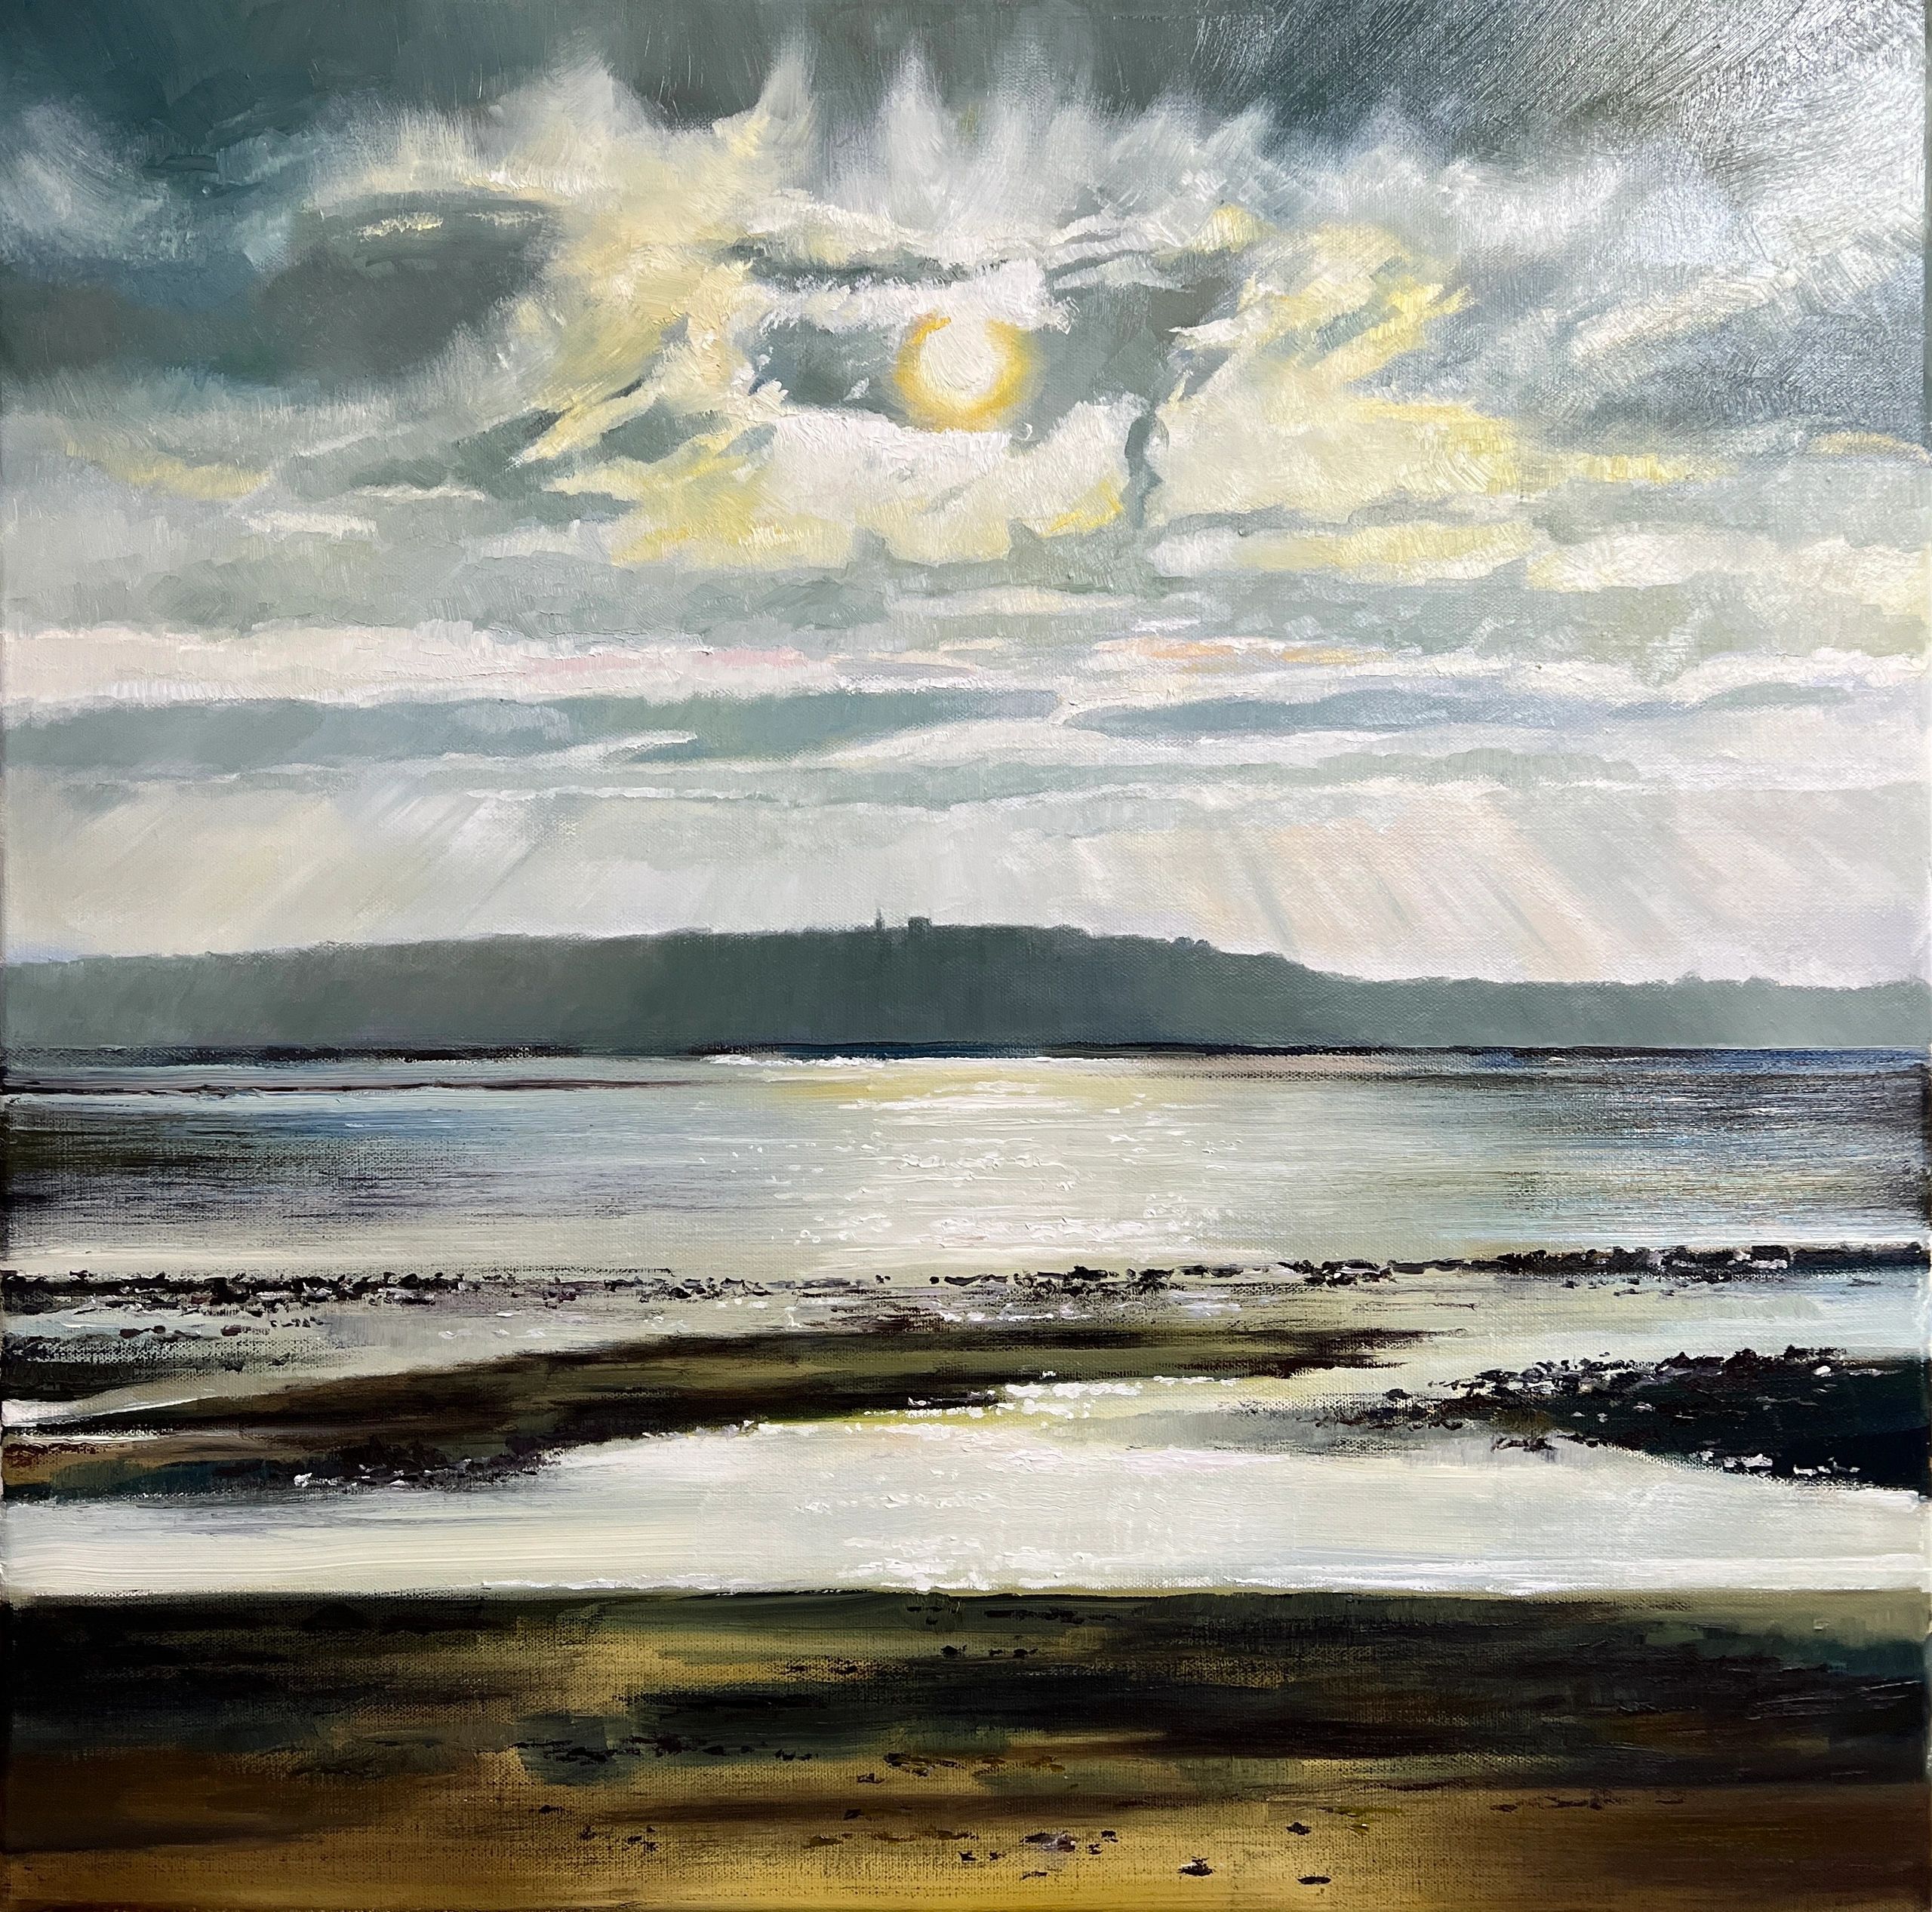 Looking over to Appledore from Crow Point - Oil painting on Canvas - Size 60x60 cm 